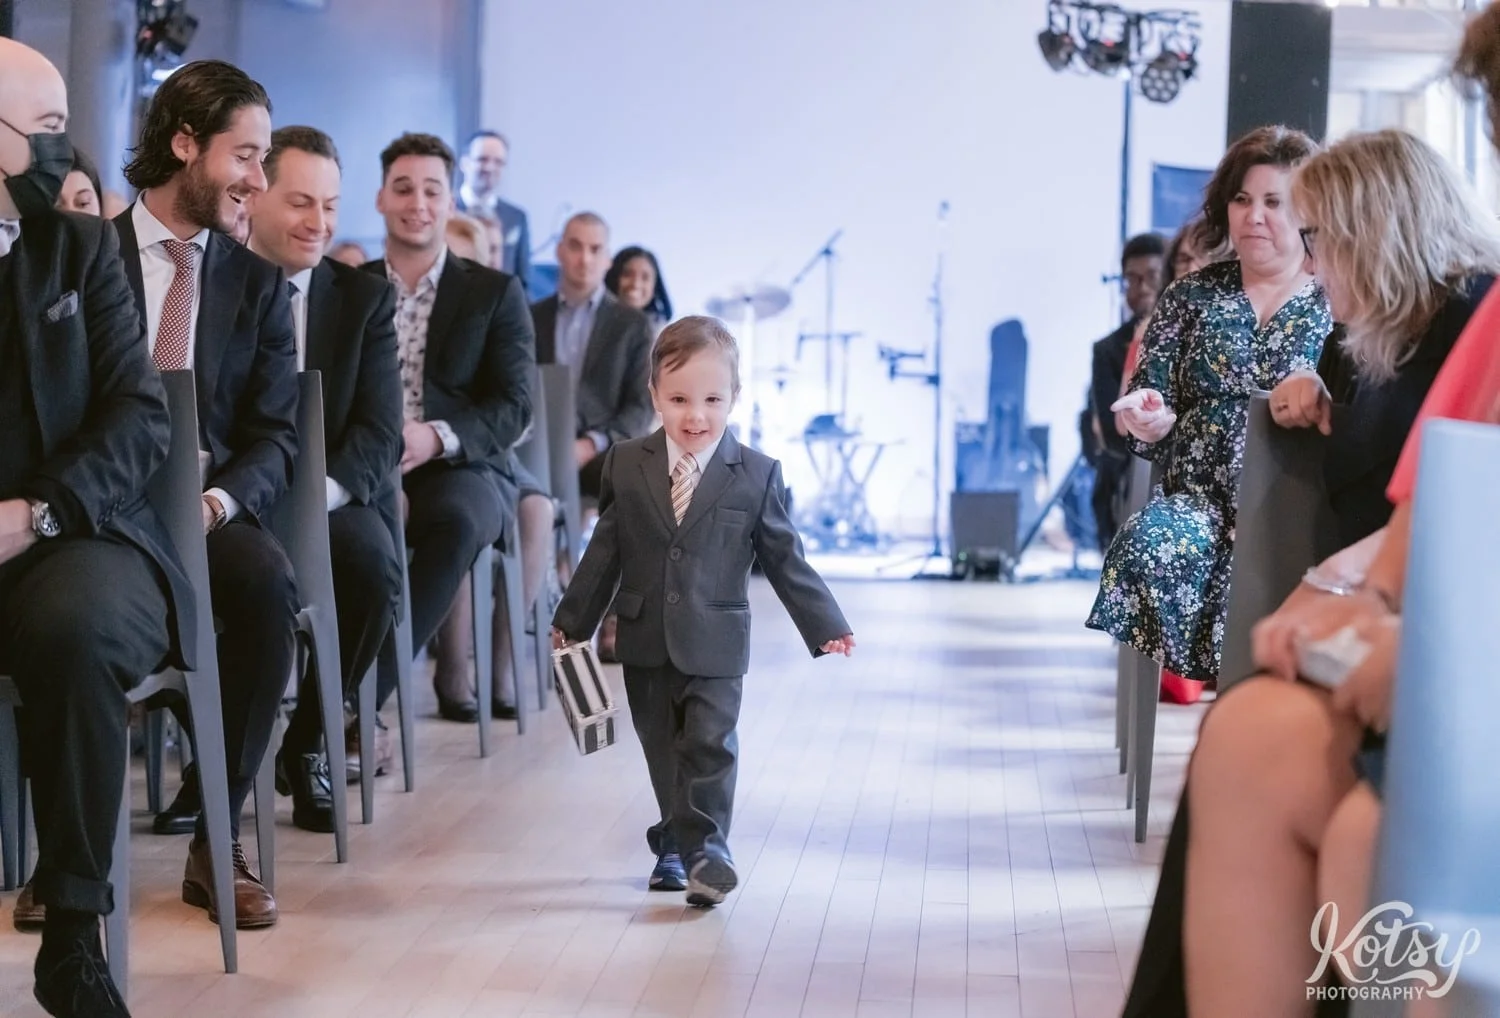 A ring bearer holding a little suitcase walks down the aisle during a wedding ceremony